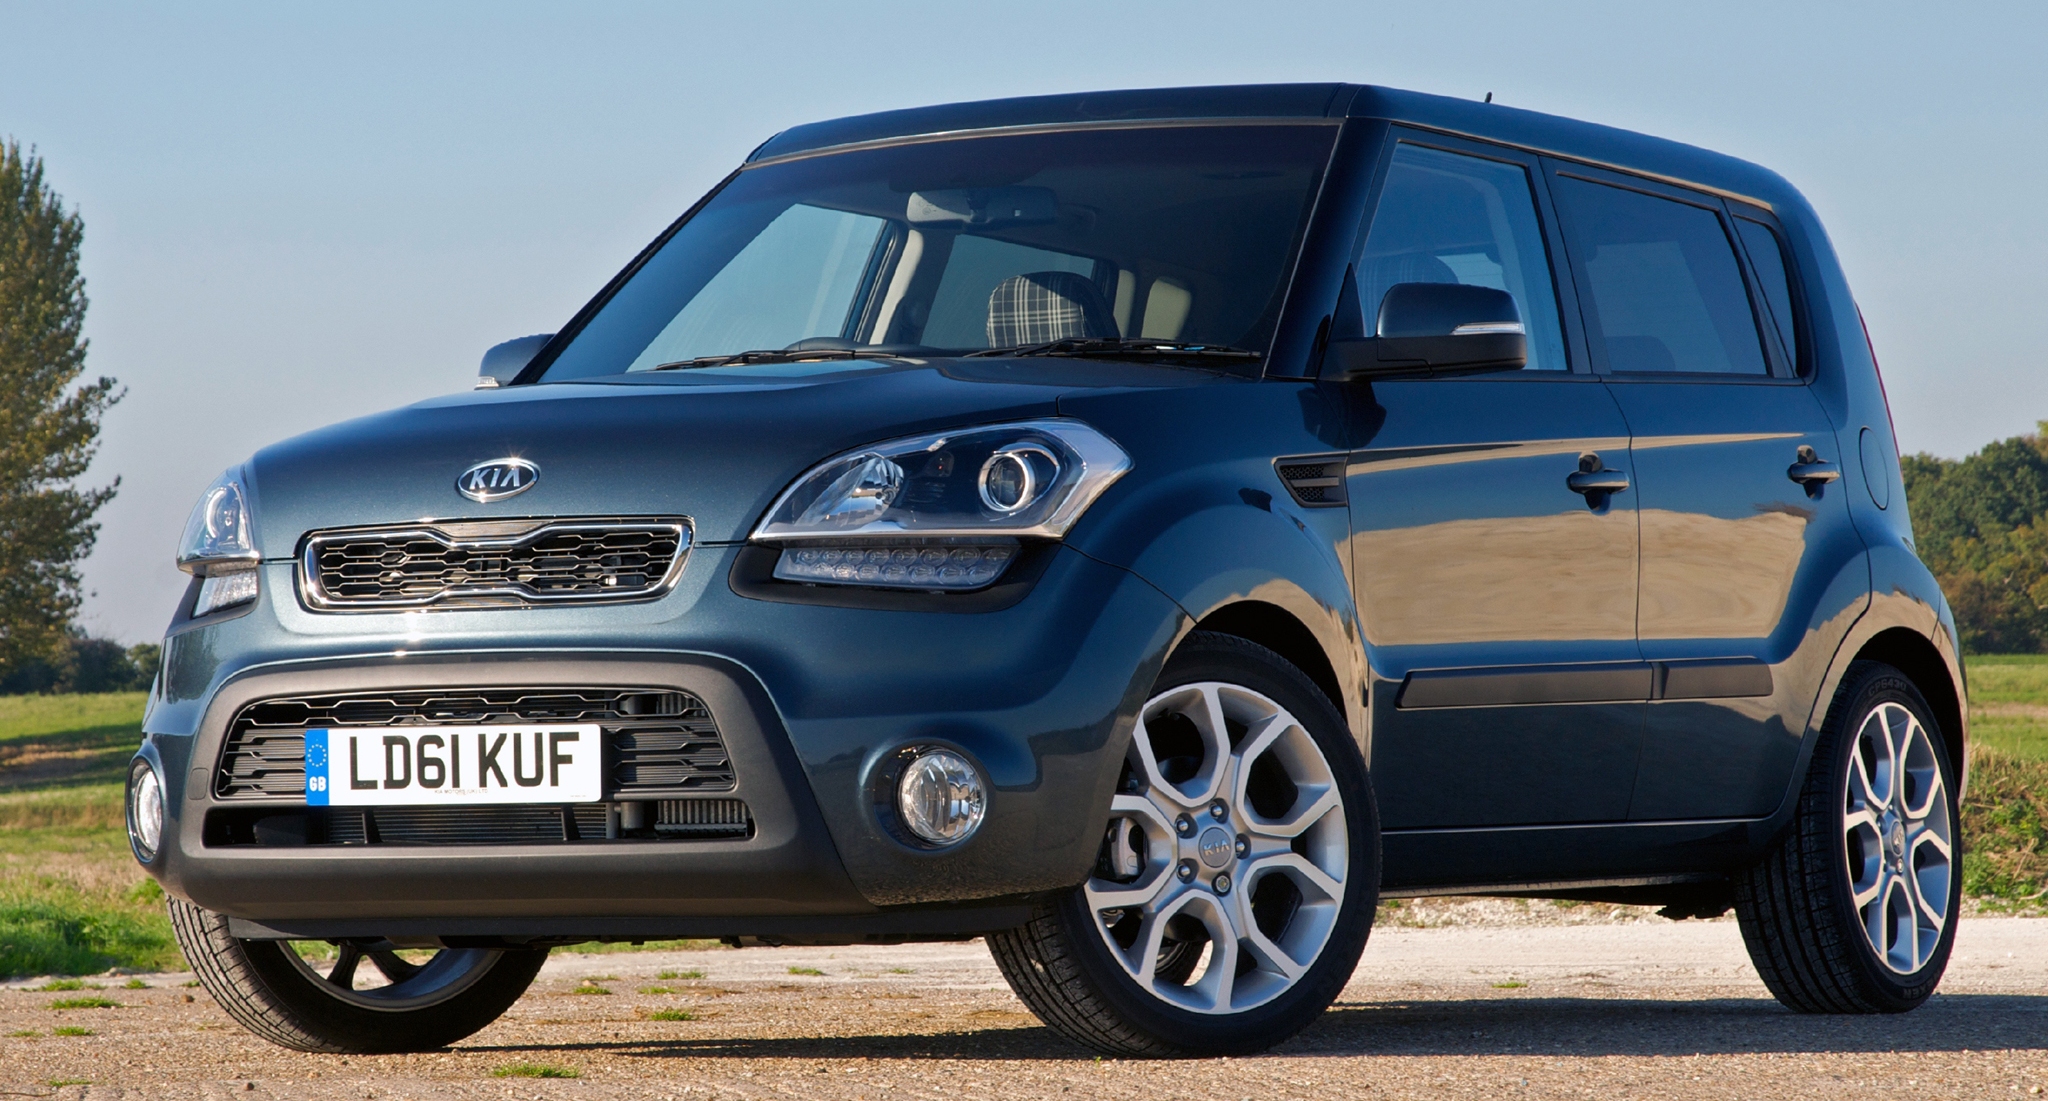 electric kia soul confirmed for mid 2014